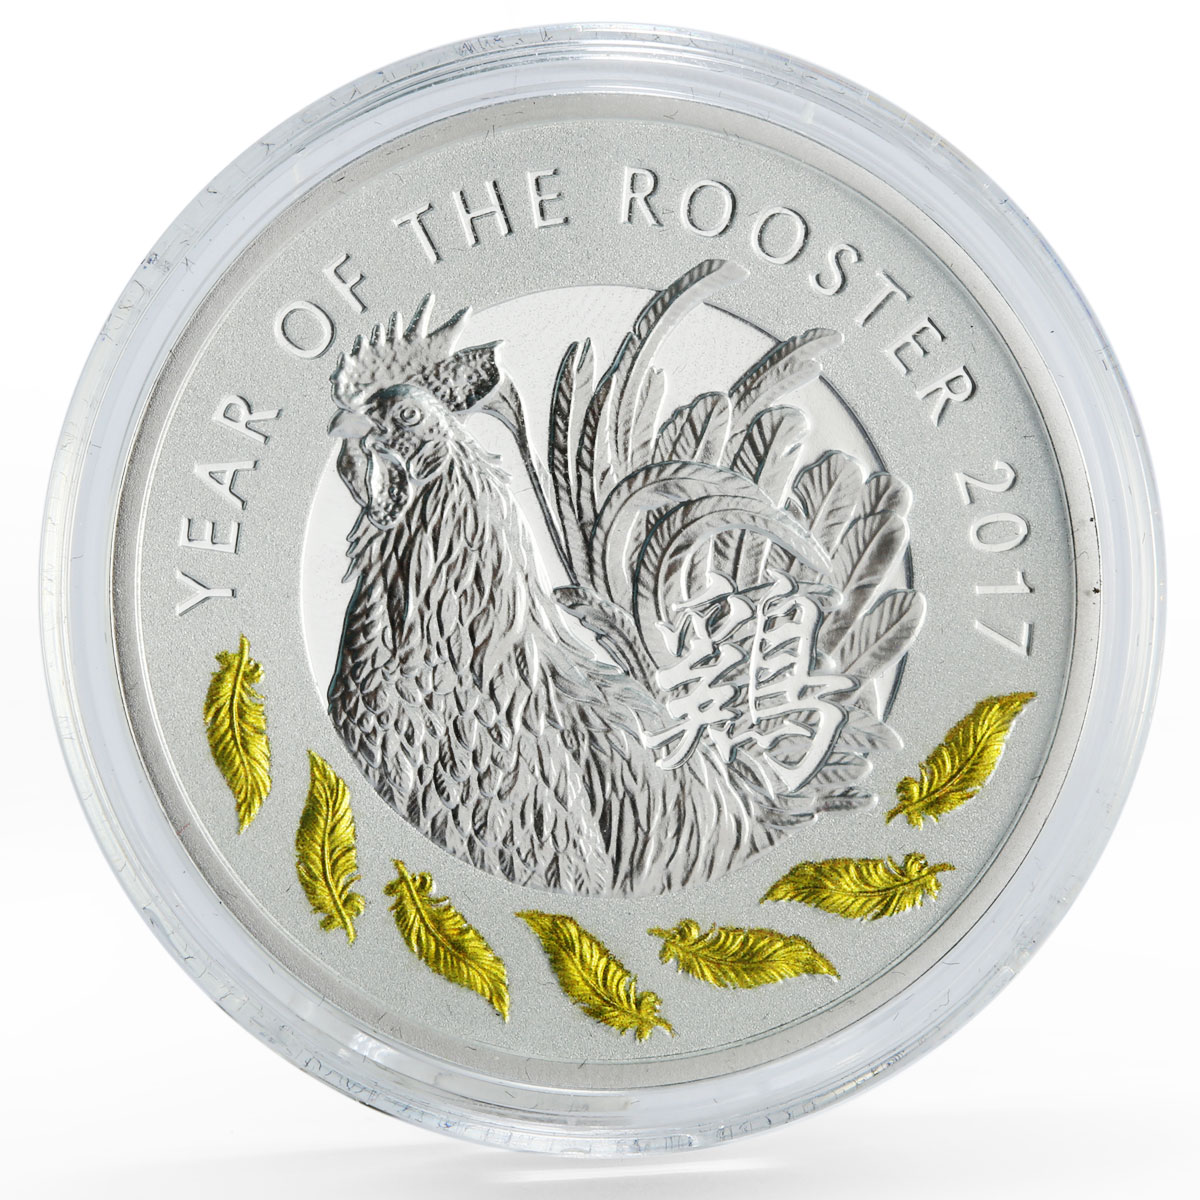 Niue 1 dollar Lunar Calendar series Year of the Rooster gilded silver coin 2017